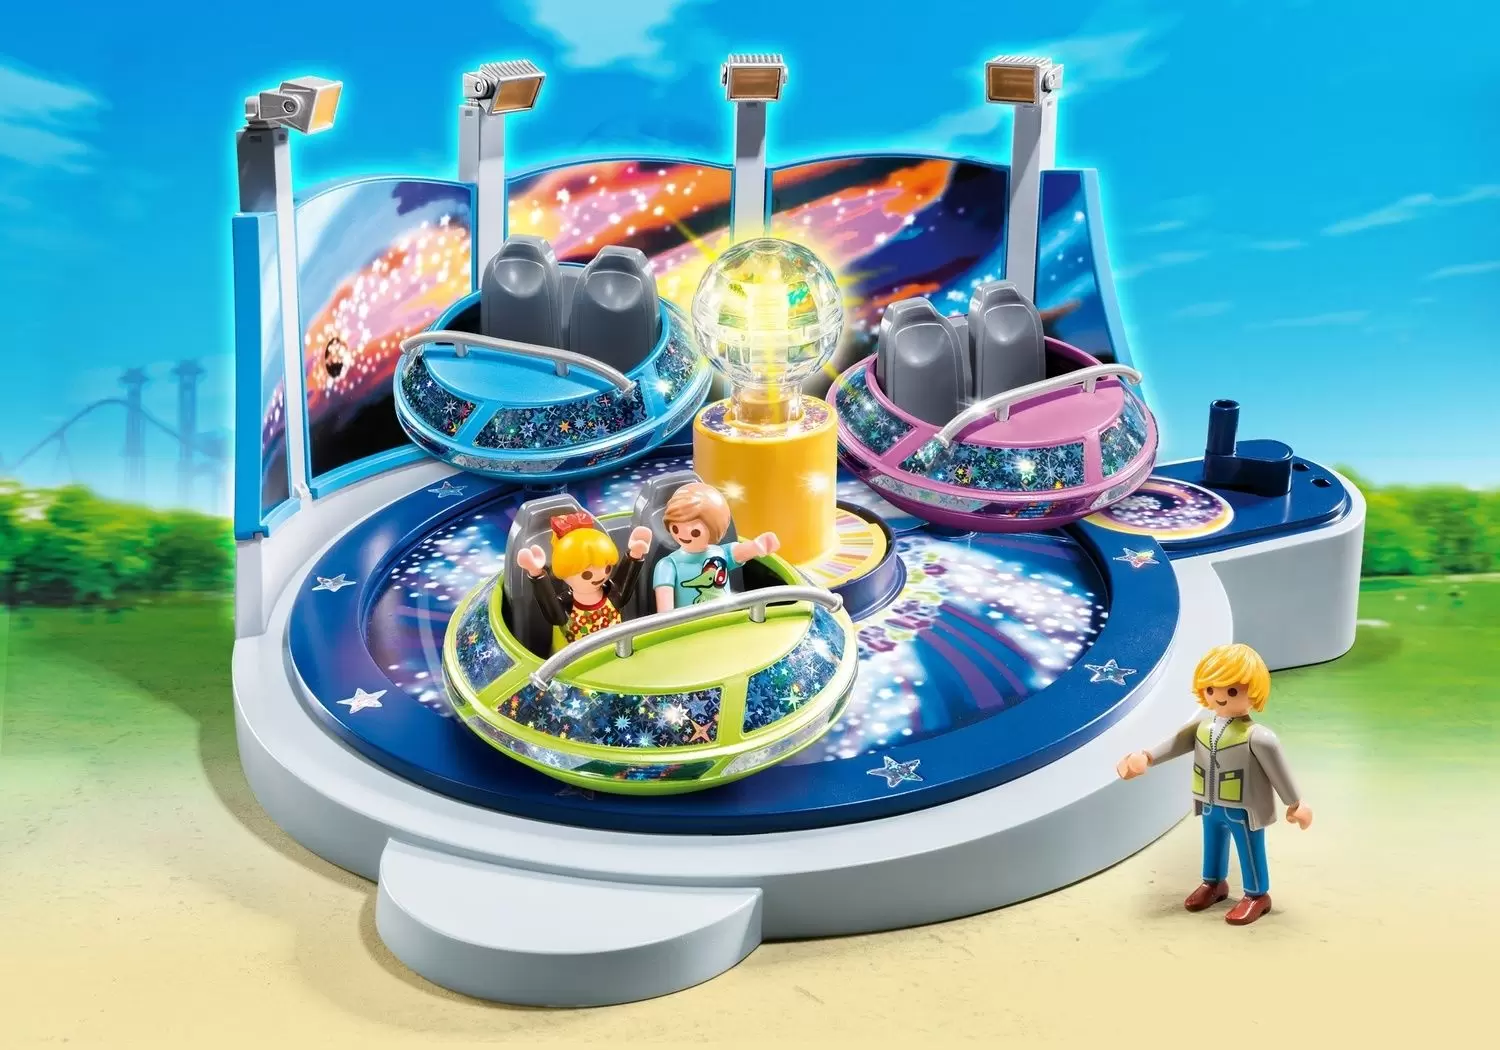 Playmobil on Hollidays - Spinning Spaceship Ride with Lights